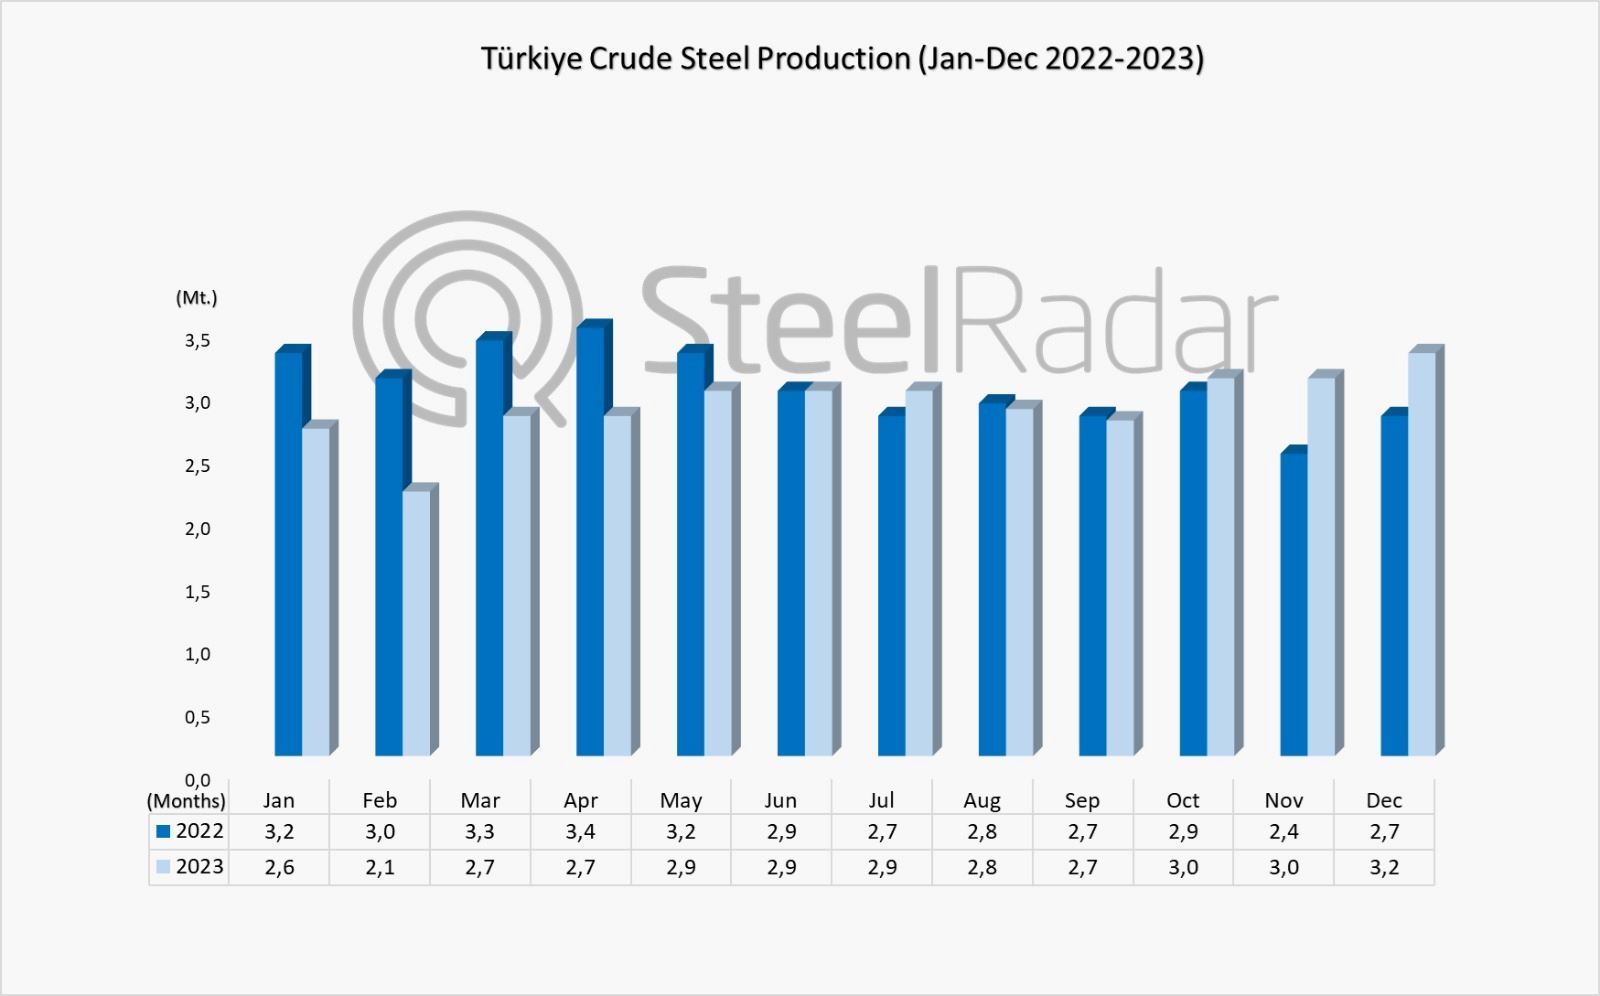 World crude steel production remained stable in 2023 Türkiye's production decreased by 4%